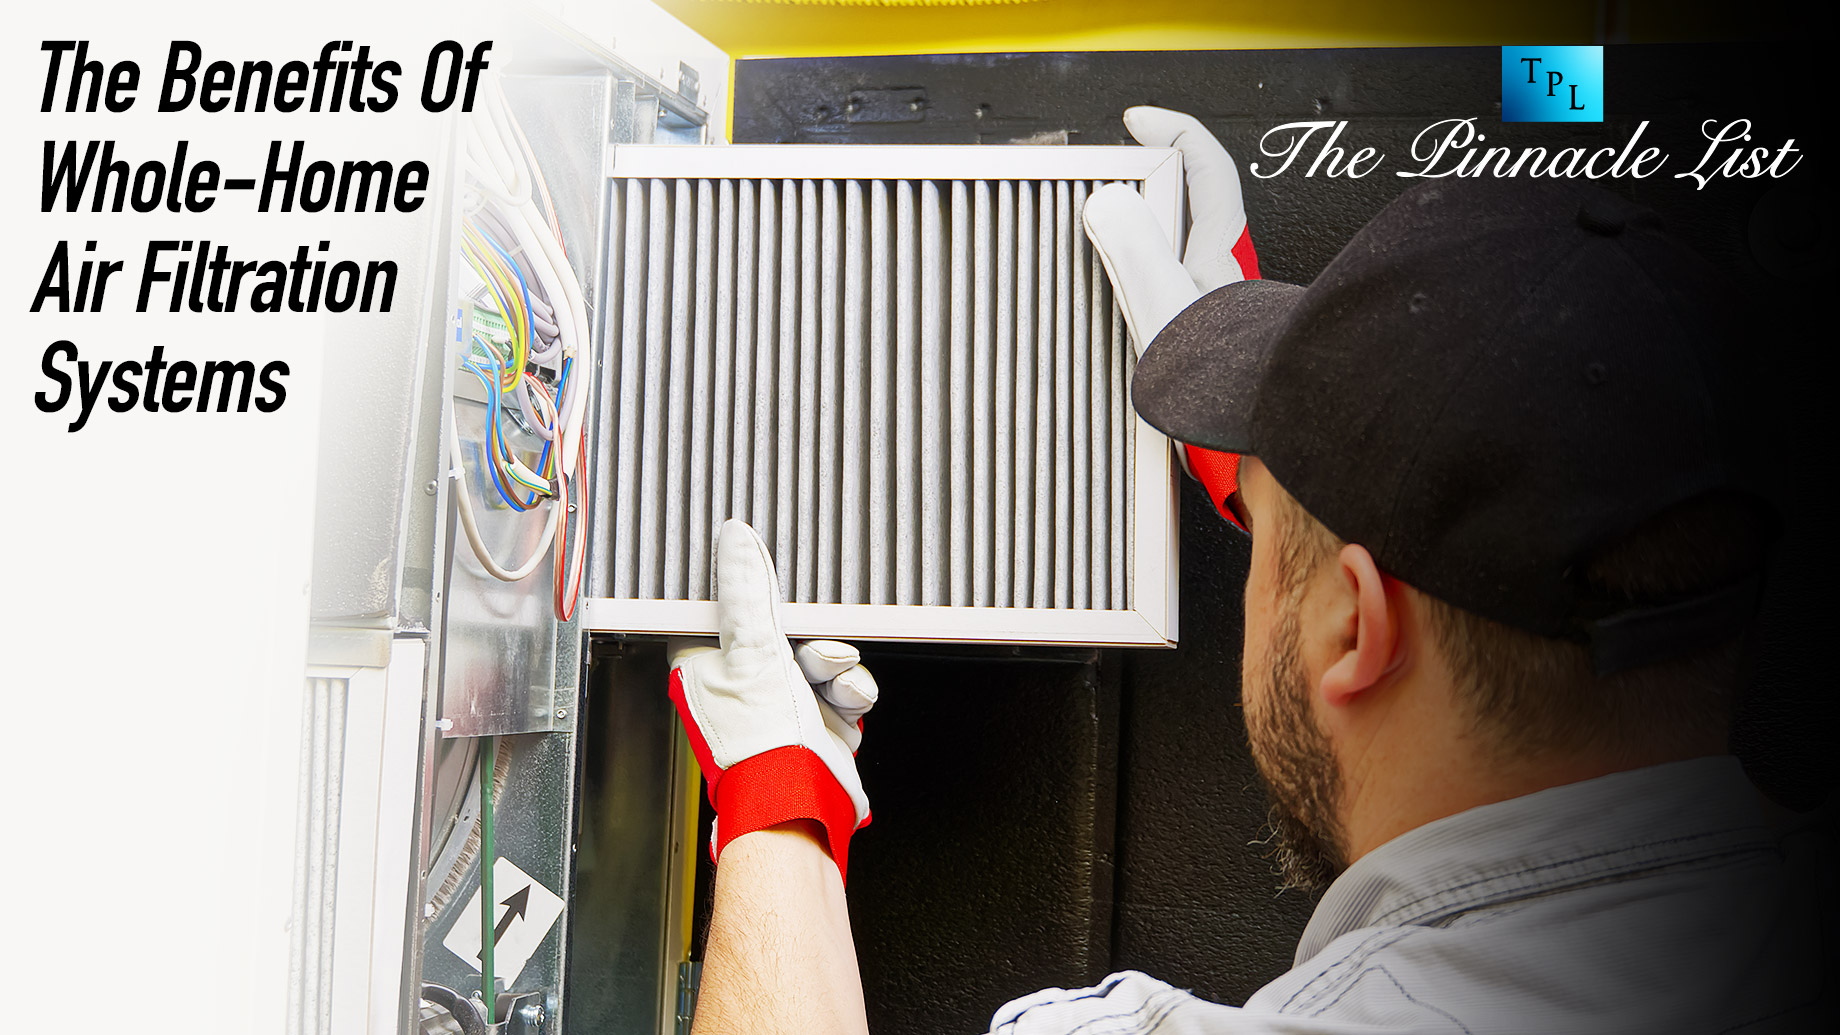 The Benefits Of Whole-Home Air Filtration Systems